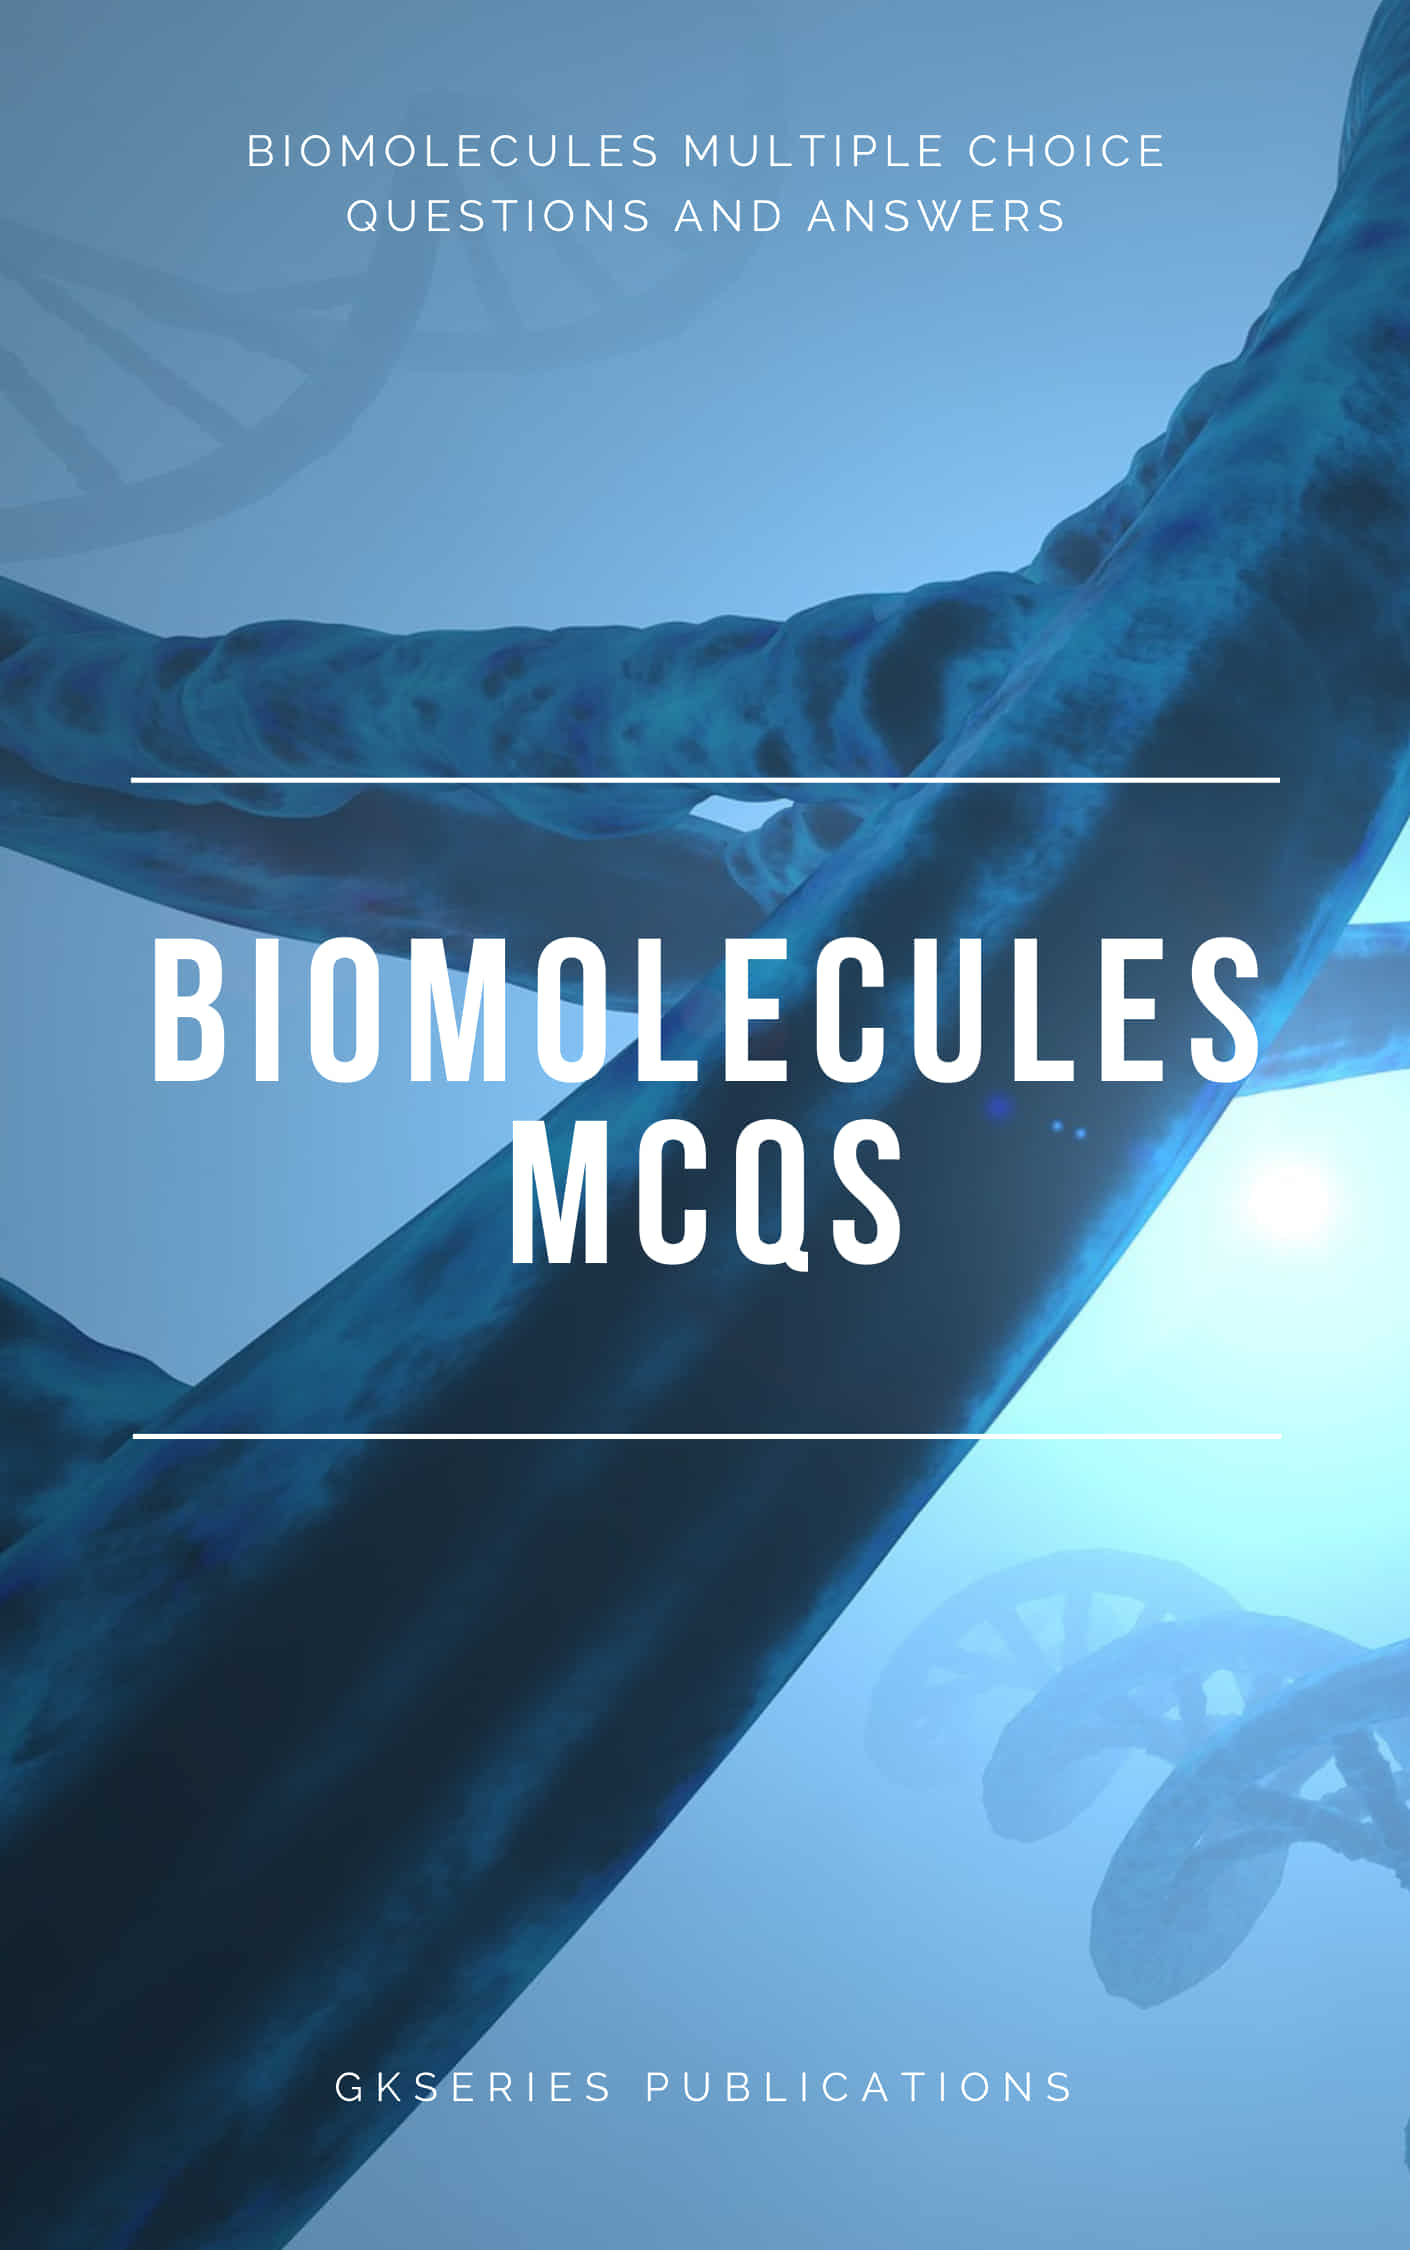 Biomolecules Multiple Choice Questions and Answers